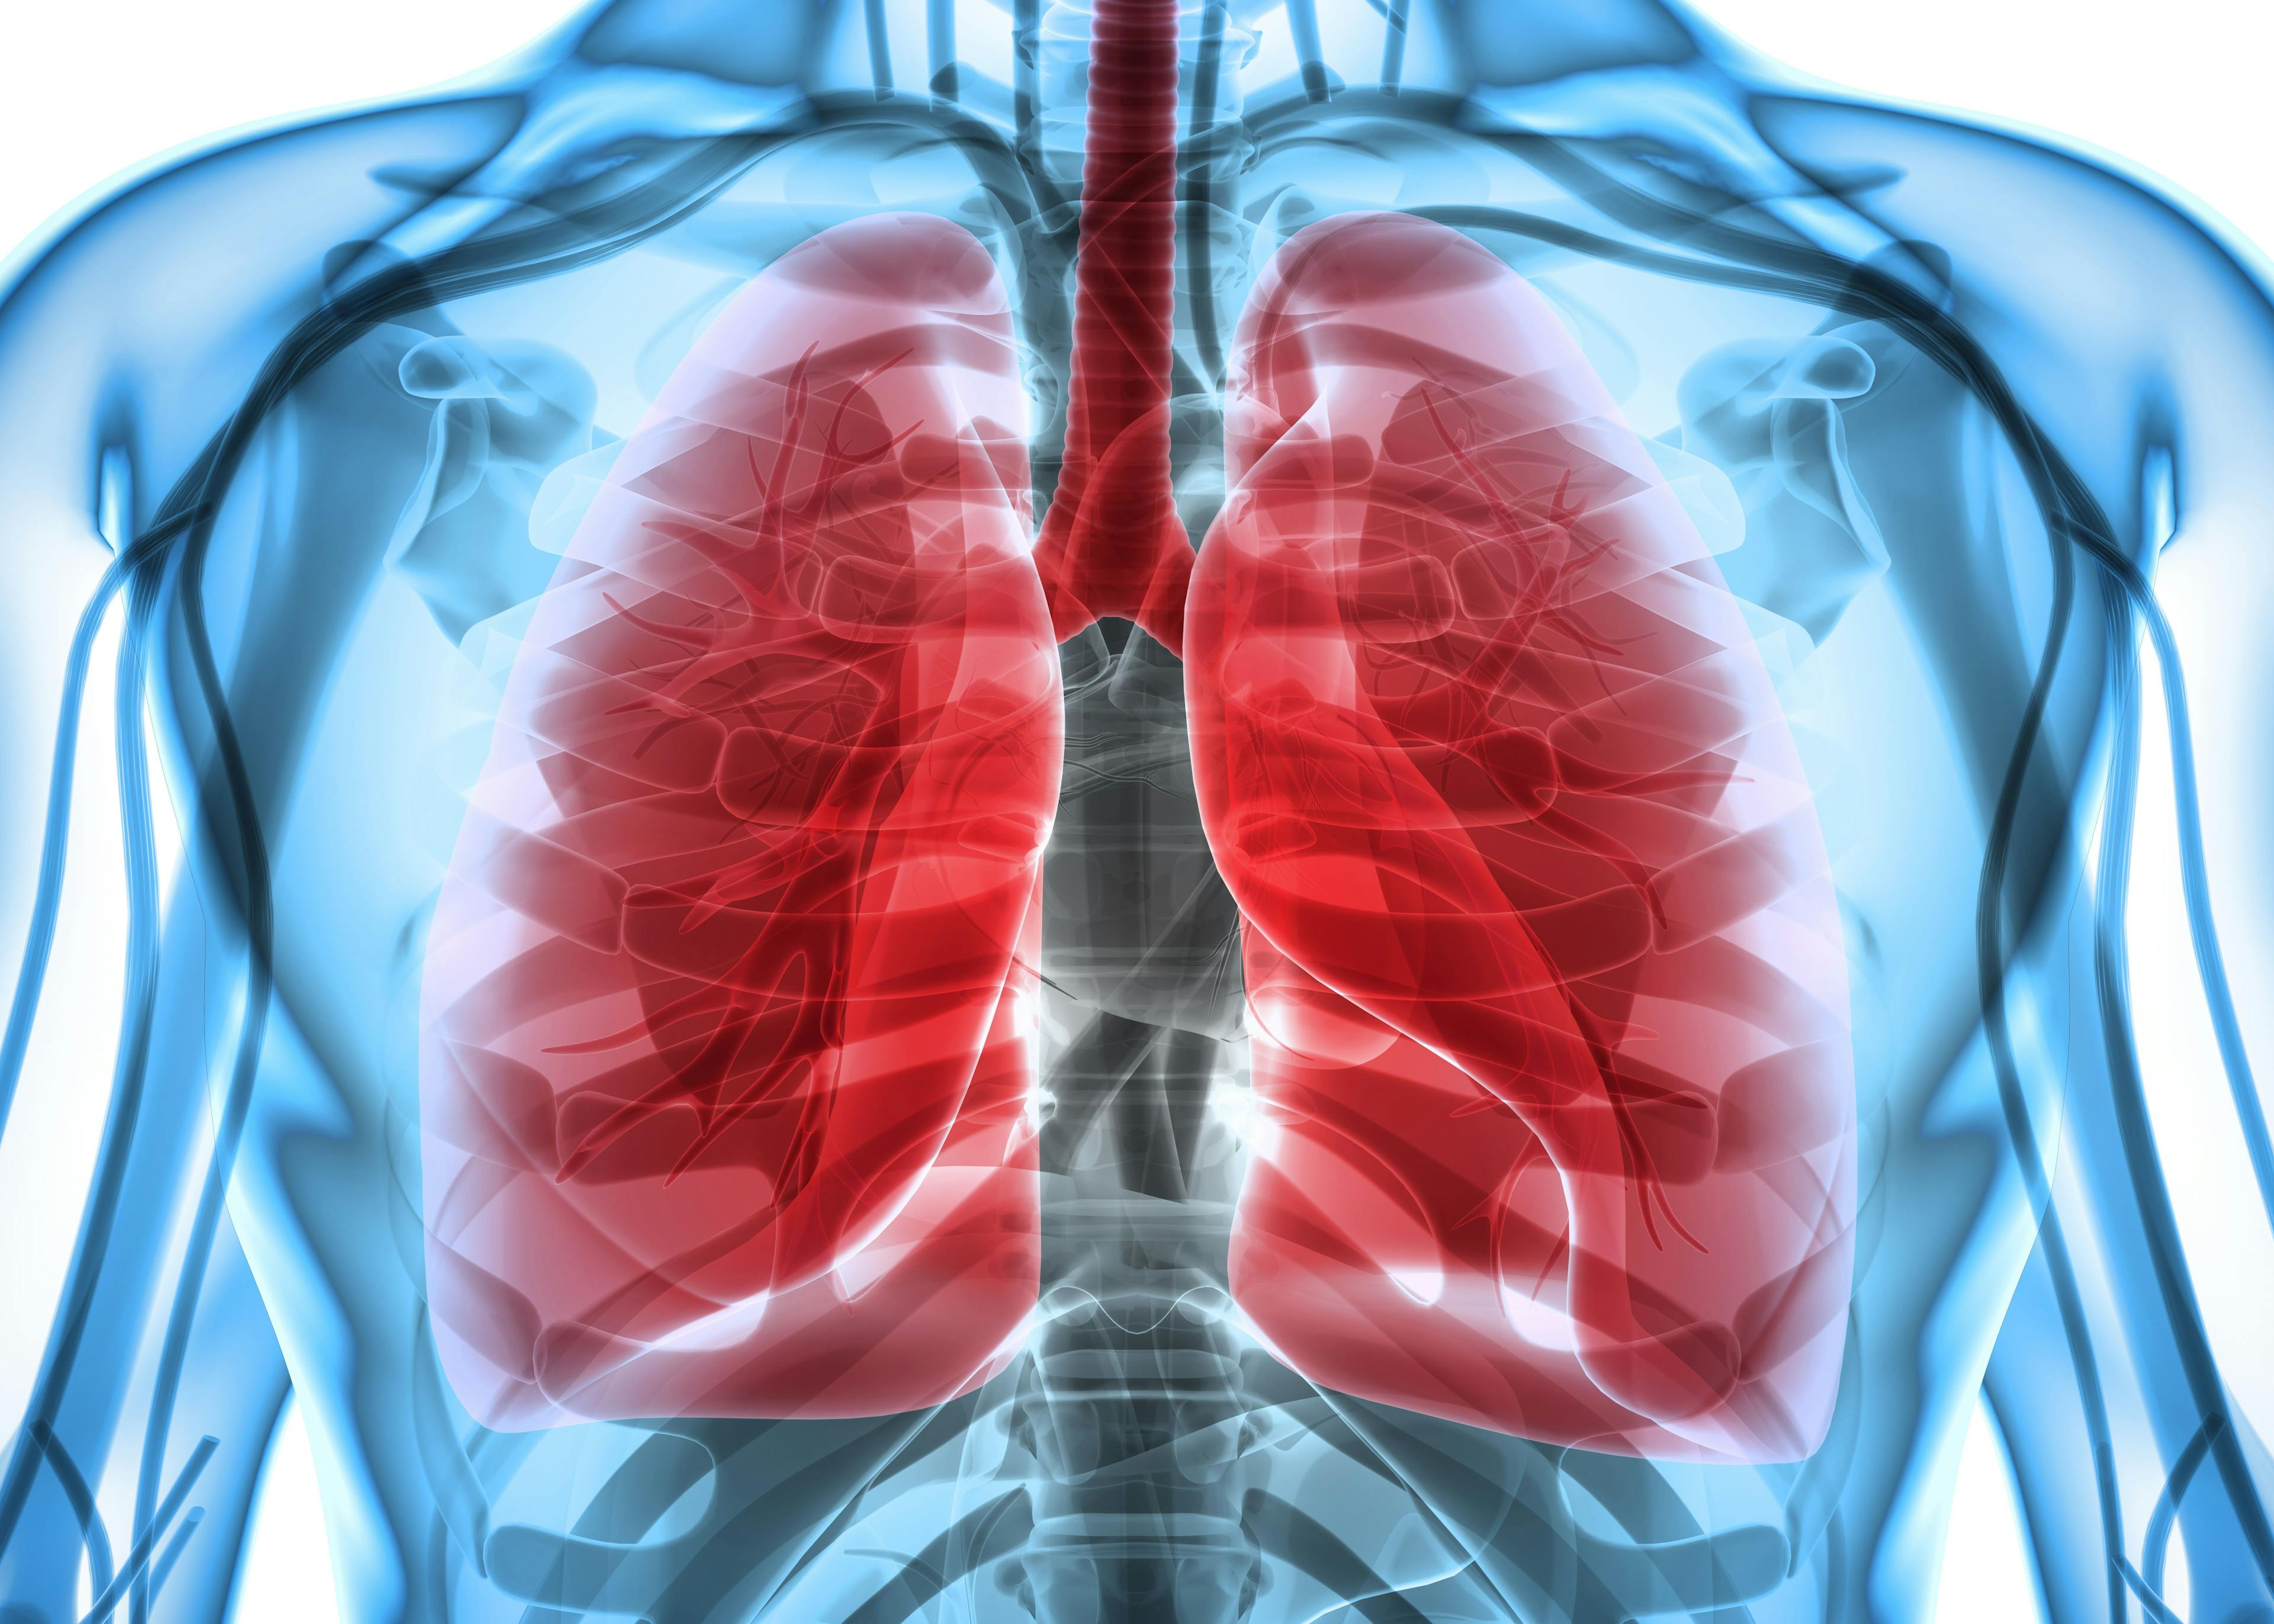 Updated Data Support Significant Clinical Benefit of Entrectinib in ROS1 Fusion+ NSCLC